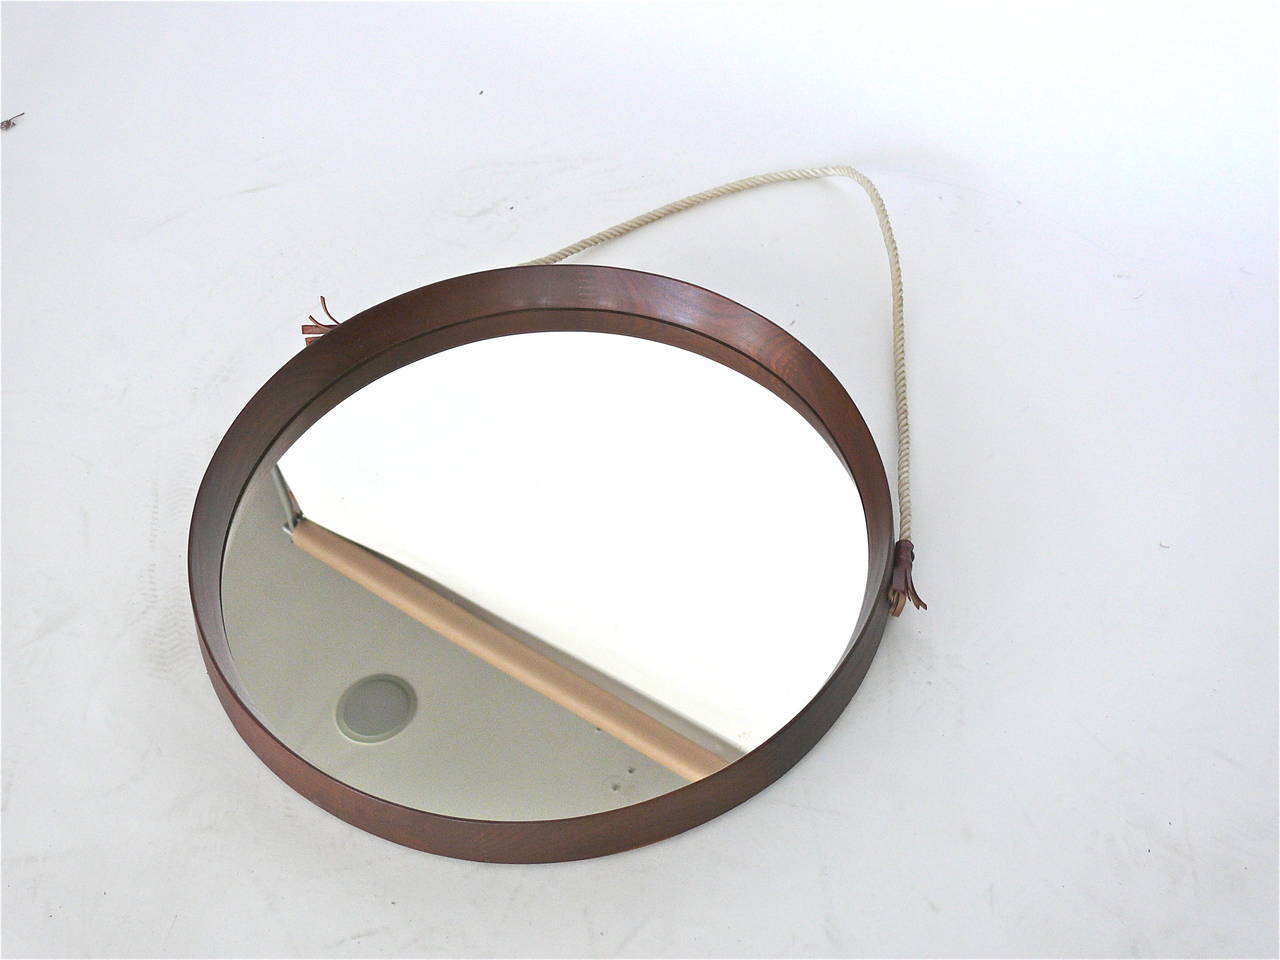 Round Danish mirror with teak frame. Mirror suspended by a twisted rope strap. Excellent vintage condition. Oval and octagonal teak mirrors also available.